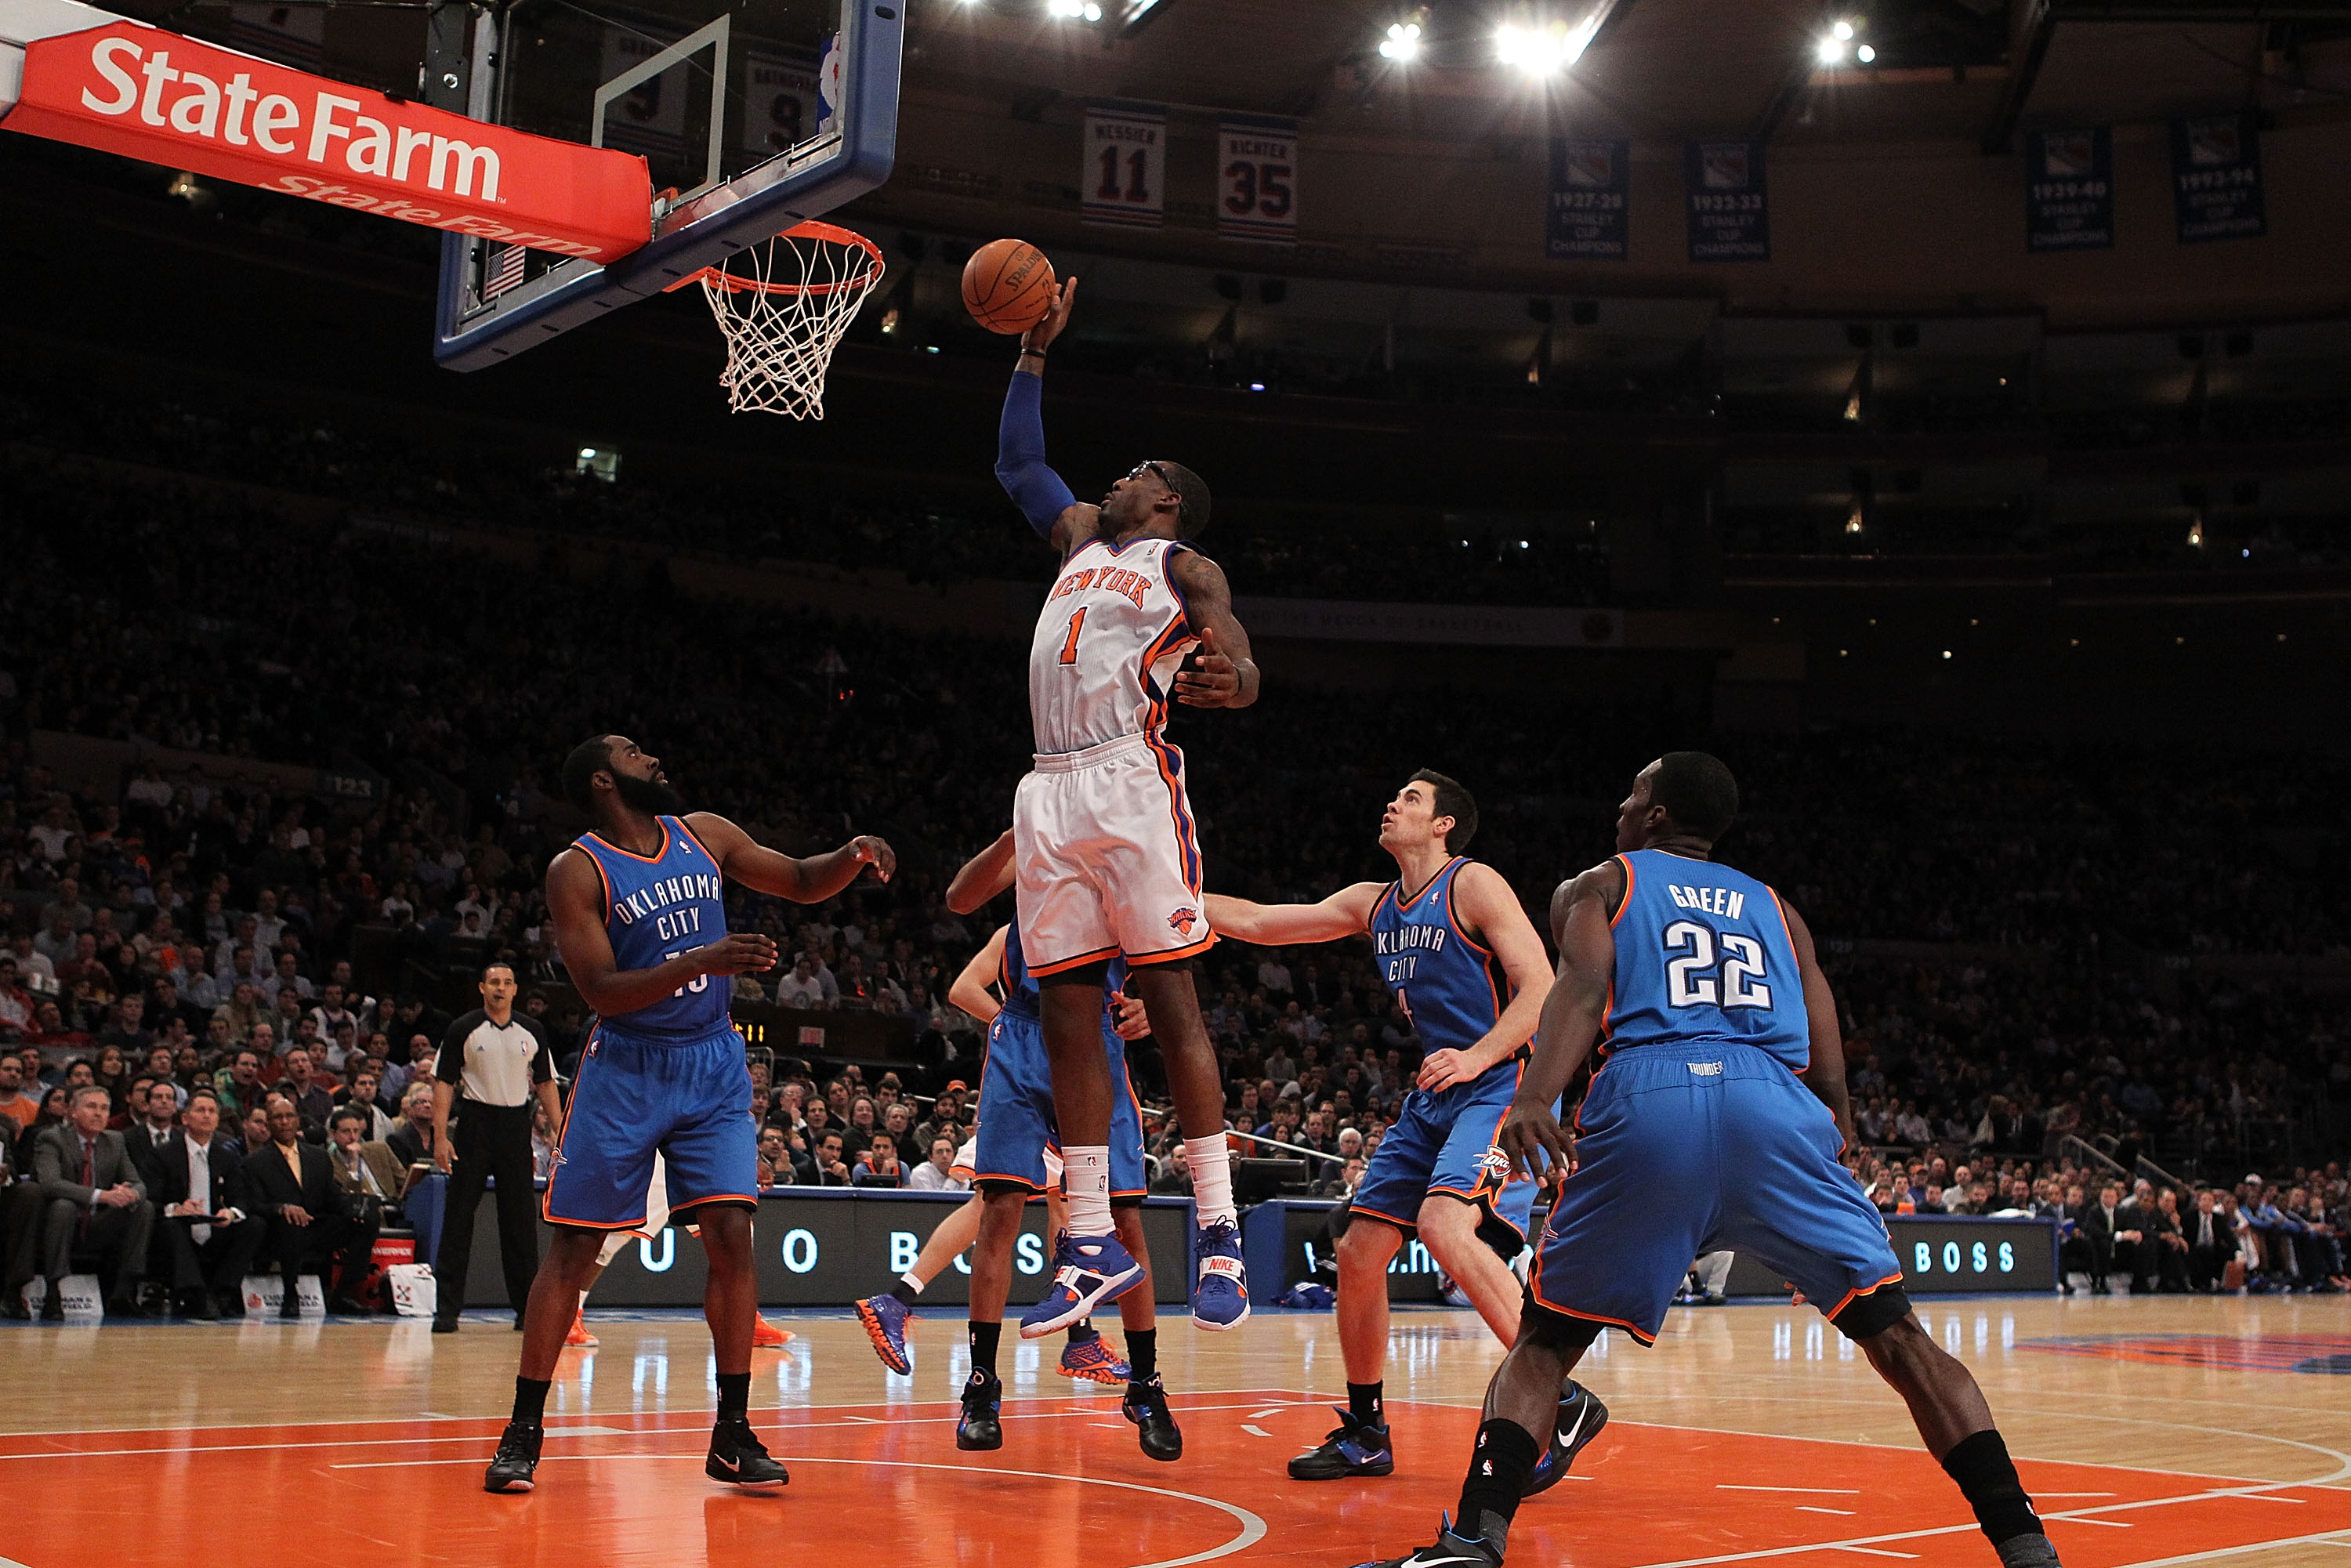 NEW YORK - DECEMBER 22:  Amar'e Stoudemire #1 of the New York Knicks rebounds the ball against  the Oklahoma City Thunder at Madison Square Garden on December 22, 2010 in New York, New York.   NOTE TO USER: User expressly acknowledges and agrees that, by